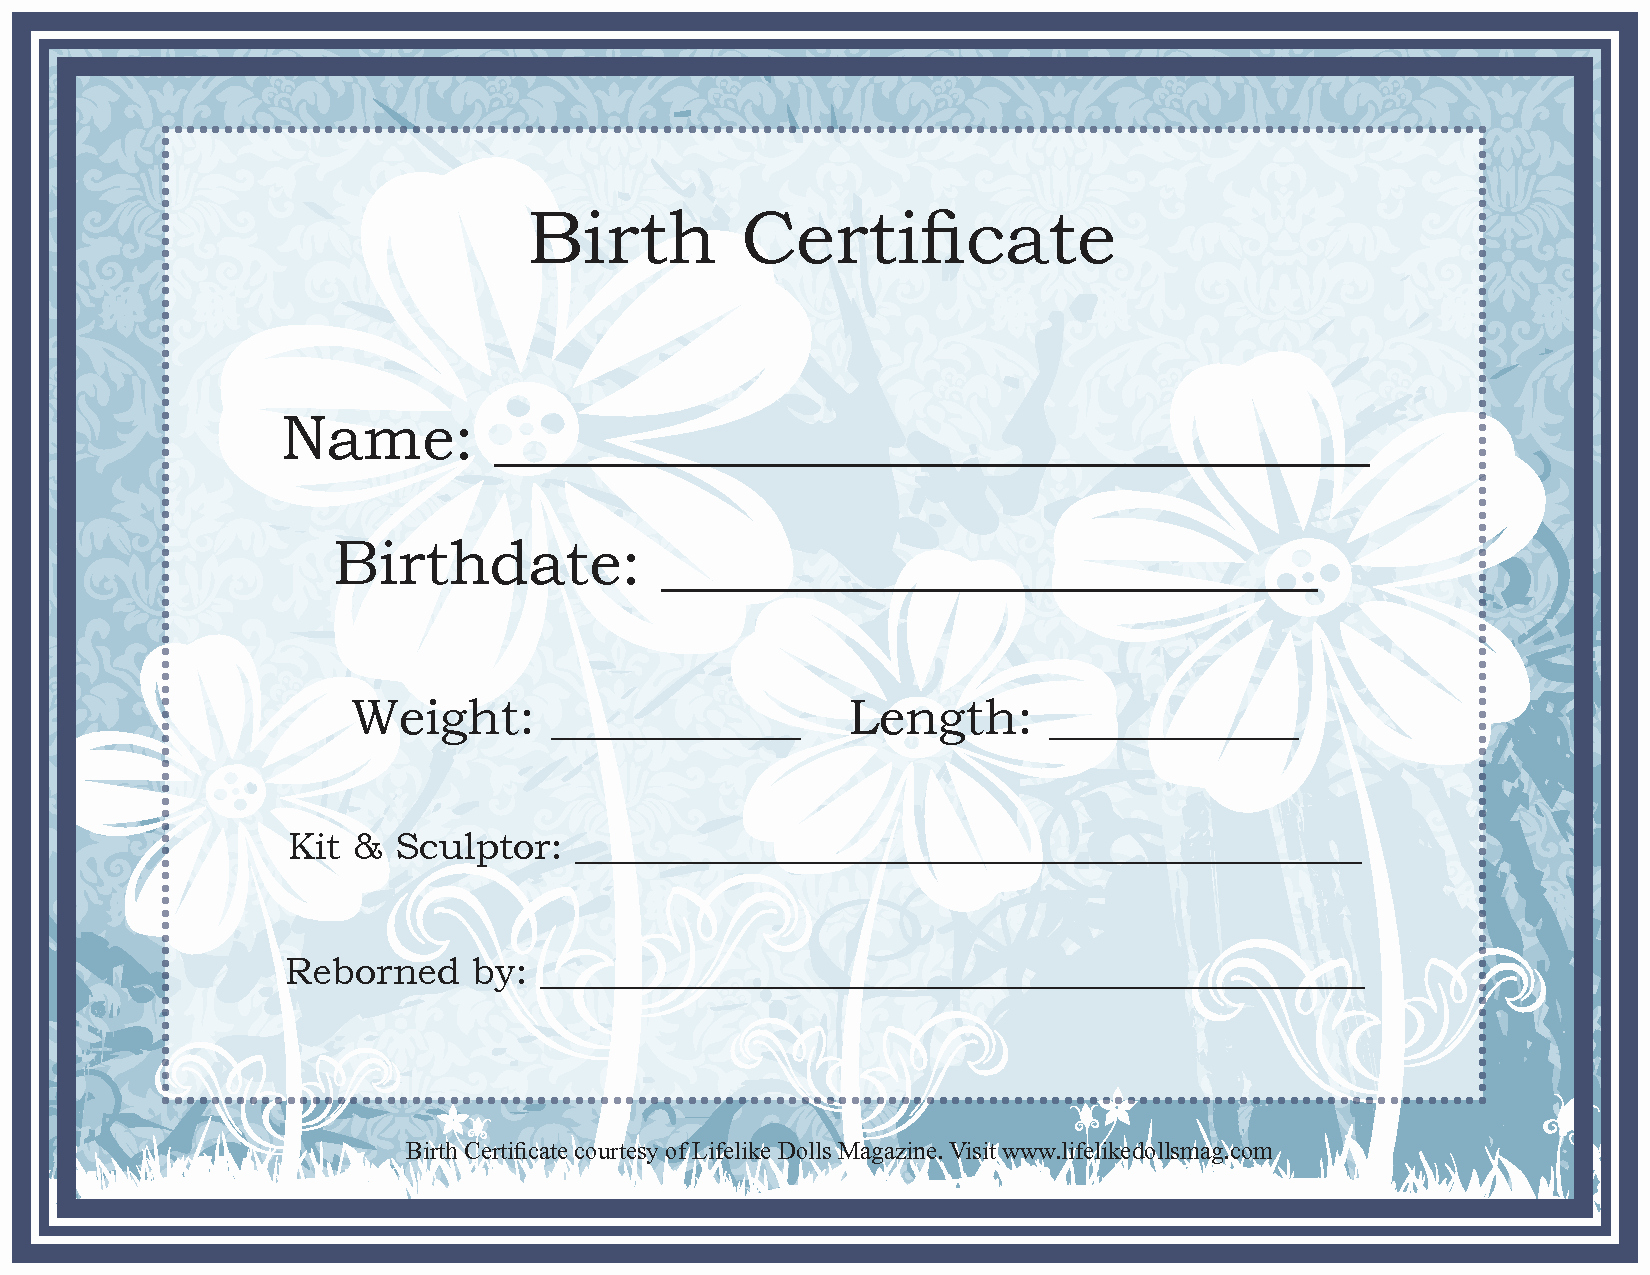 Cabbage Patch Birth Certificate Template Lovely Certificate Template Category Page 45 Efoza